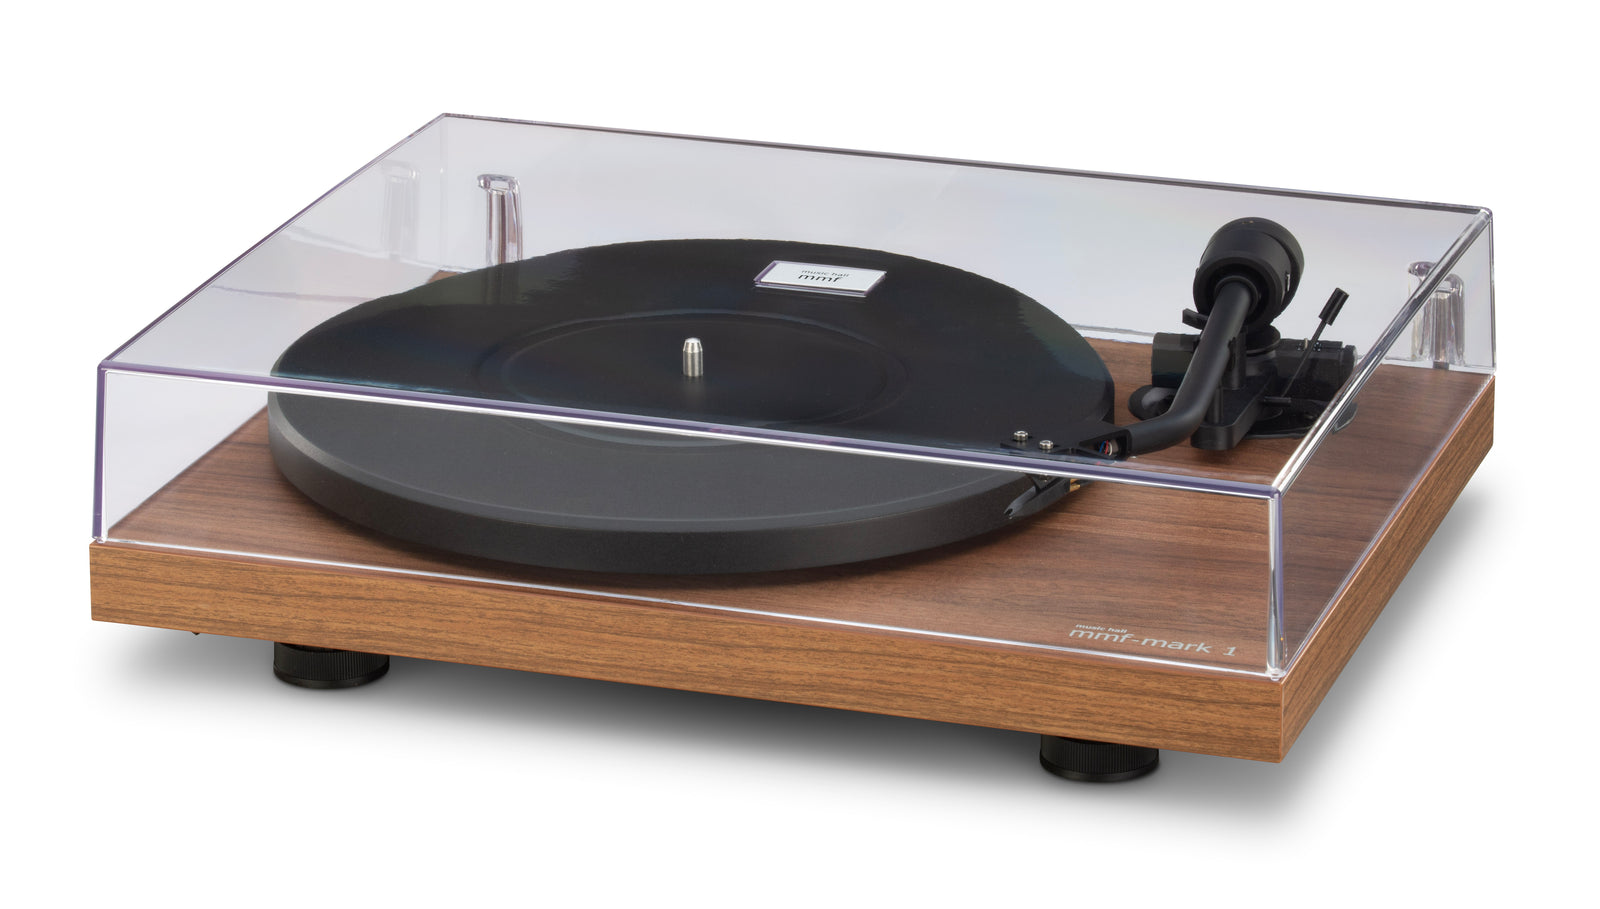 Product Highlights: Low noise, belt-drive design High-gloss piano lacquer finish or walnut veneer High-quality 8.6” S-shape aluminum tonearm with headshell and VTA adjustment and magnetic anti-skating AC synchronous motor for superior speed stability High-quality Ortofon OM 5E cartridge properly aligned and mounted